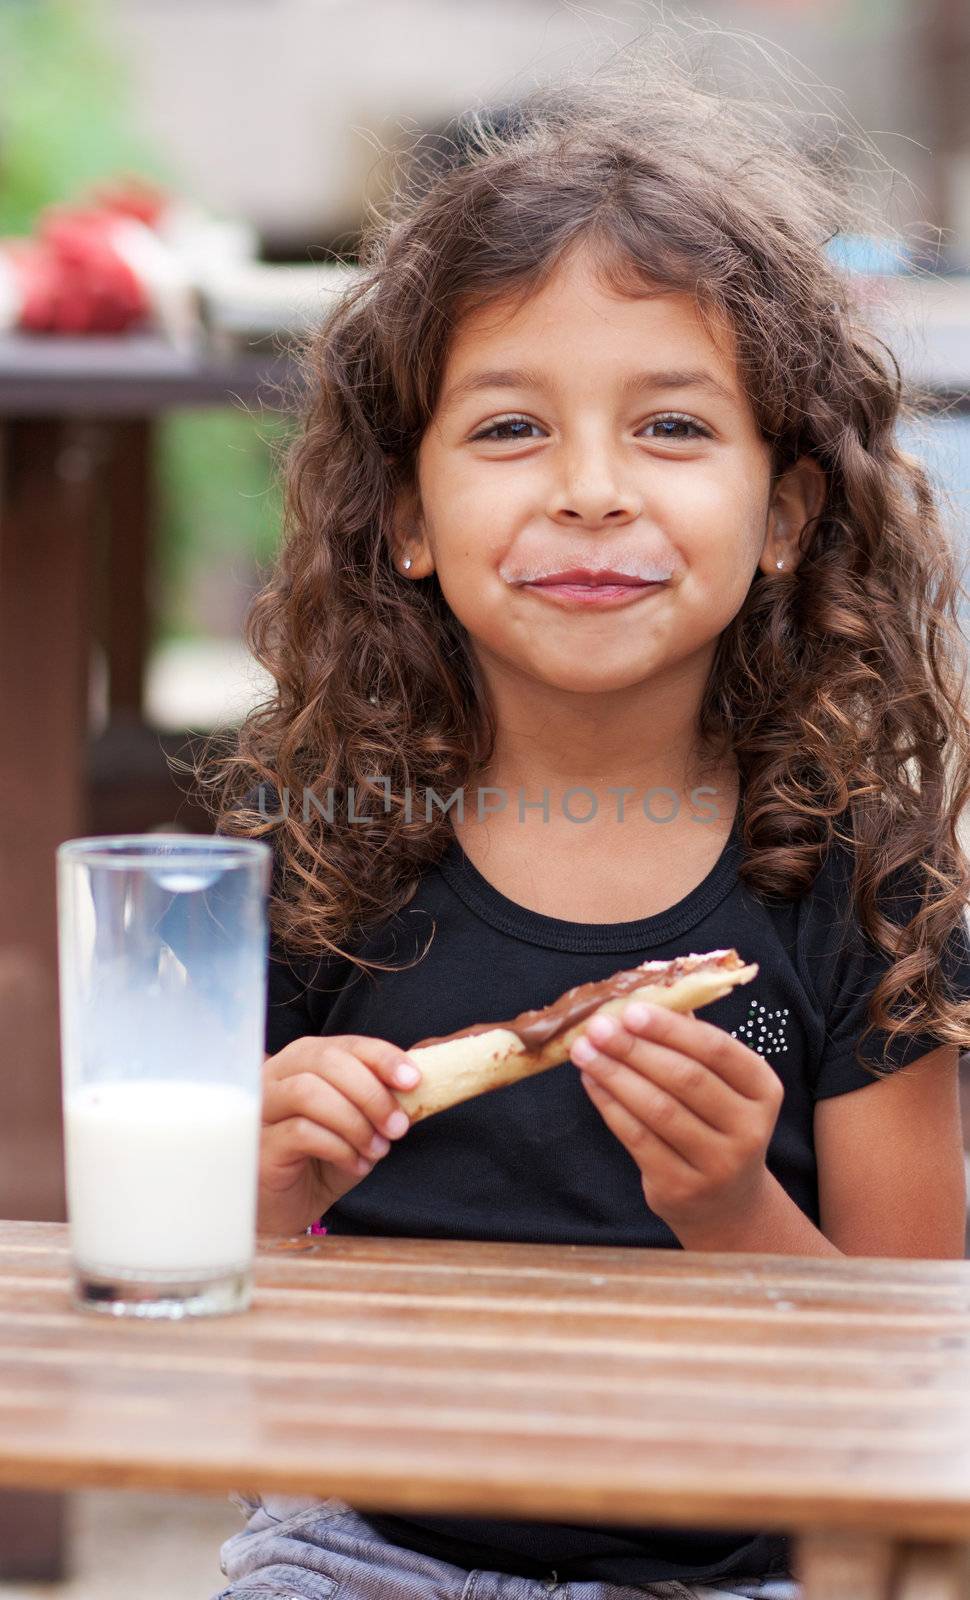 Smiling girl snacking by TristanBM